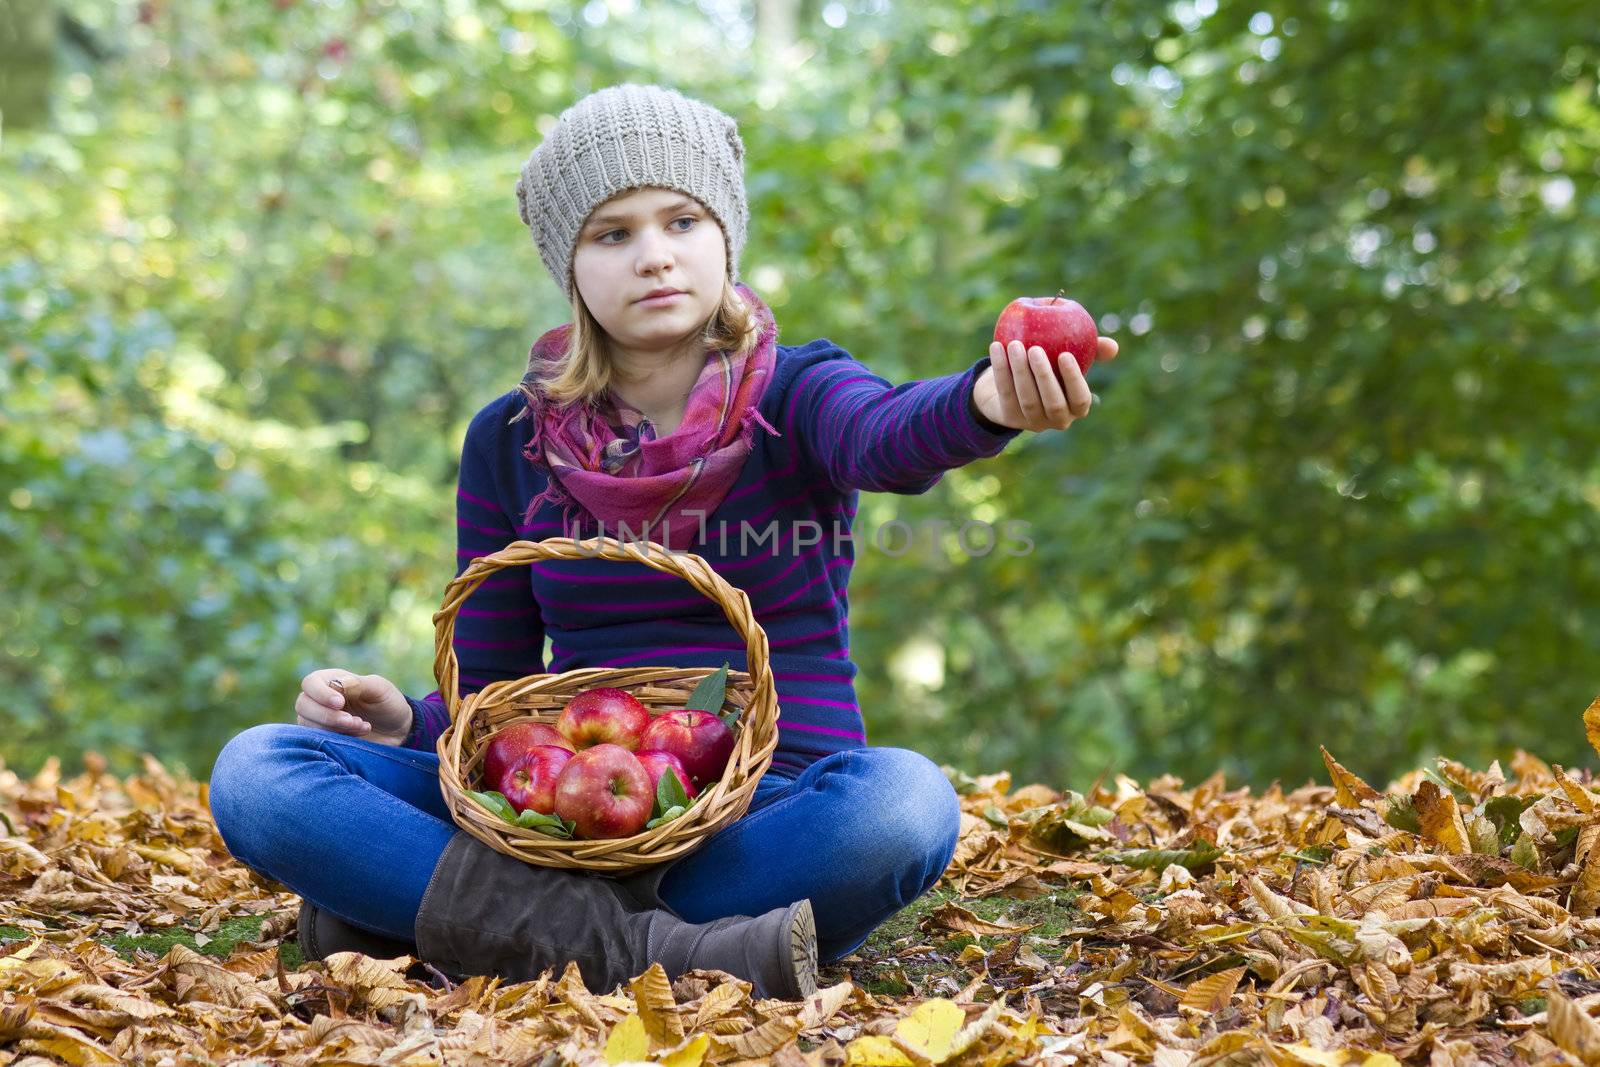 young girl with basket of apples in autumn garden by miradrozdowski